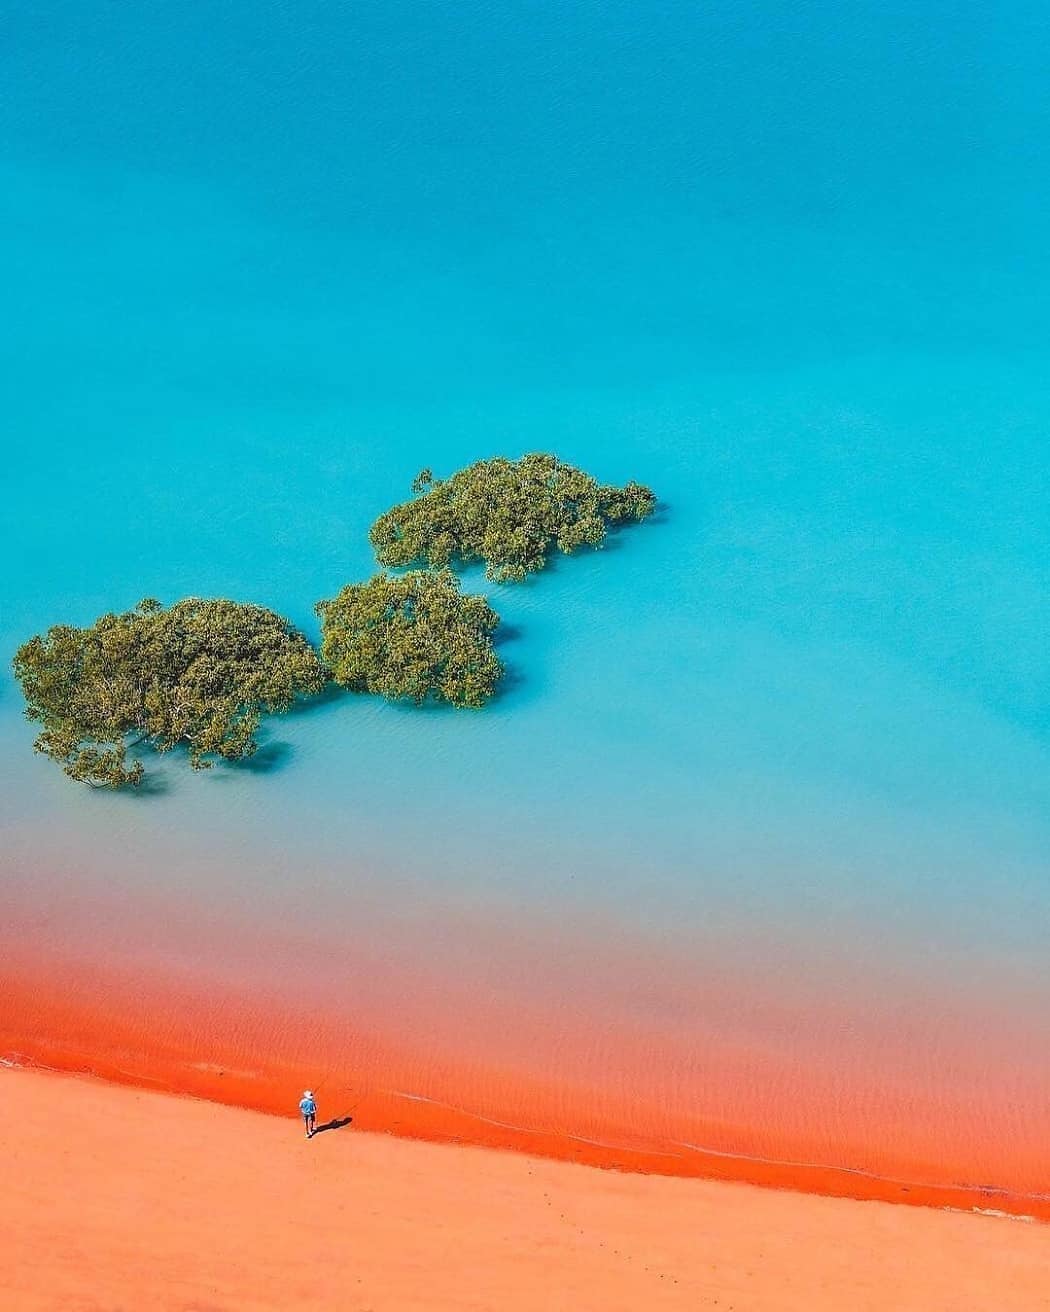 You'll see the Red planet in WA too 🔷@Regran_ed from @wondersloft - 🌏 Broome, Western Australia⠀
. ⠀
📸 @saltywings⠀
. ⠀⠀
. ⠀⠀
#wondersloft#travel#travelgram#travelling#traveling#travelphotography#traveller#travelholic#travelers#traveler#travellers#travels#travelbag#travelguide#travelblogger#travelinggram#travel_captures#travelpic#travelphoto#travellife#instagood#photooftheday#tbt#picoftheday#instadaily#Broome#WesternAustralia#Australia#Ocean